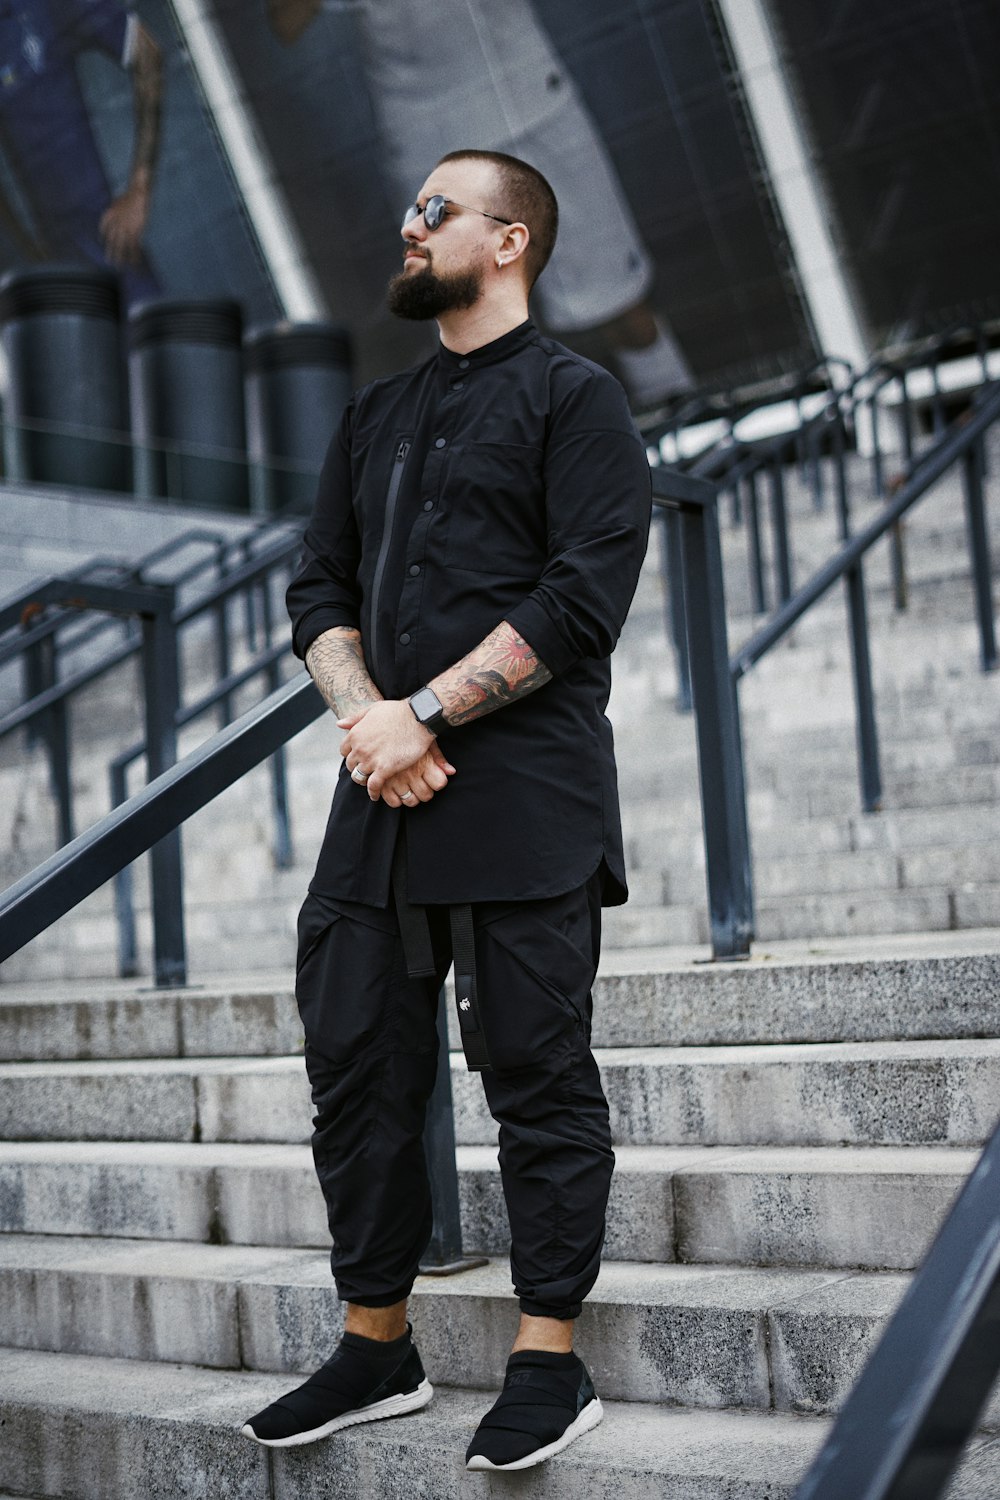 man in black dress shirt and black pants standing on gray concrete stairs